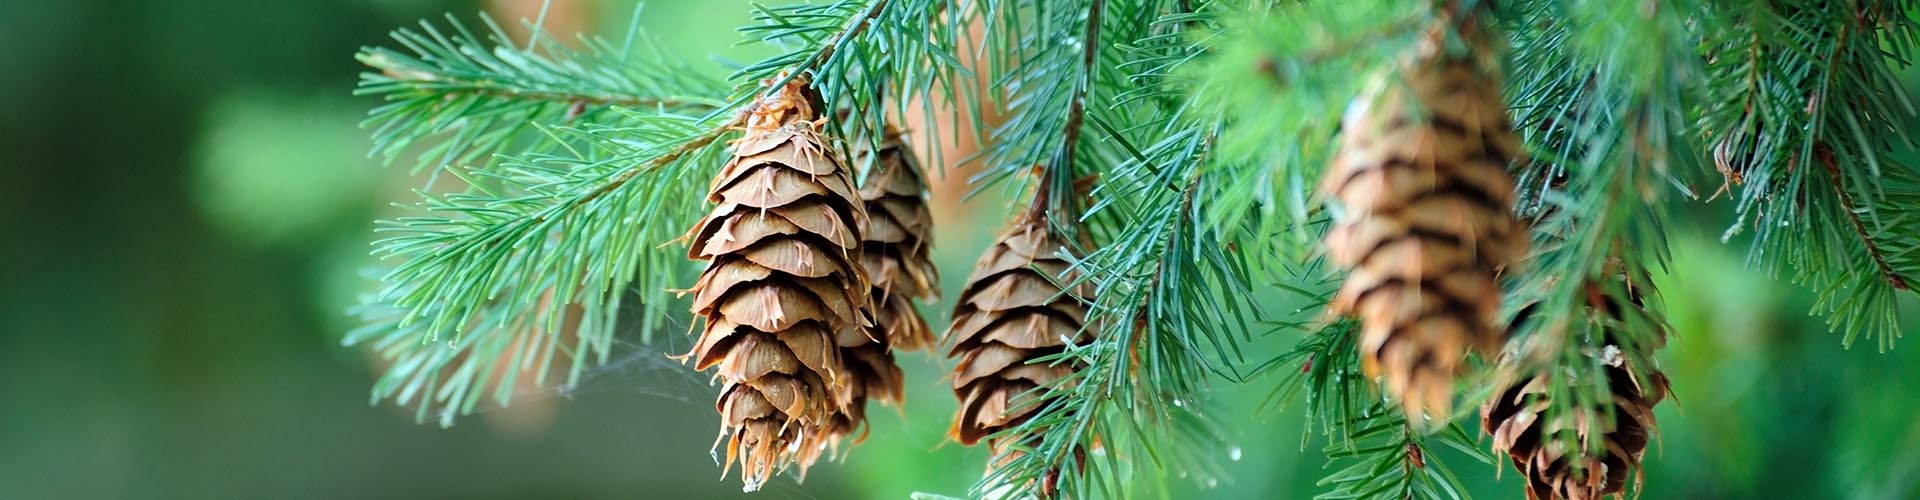 Pine branch with pine cones